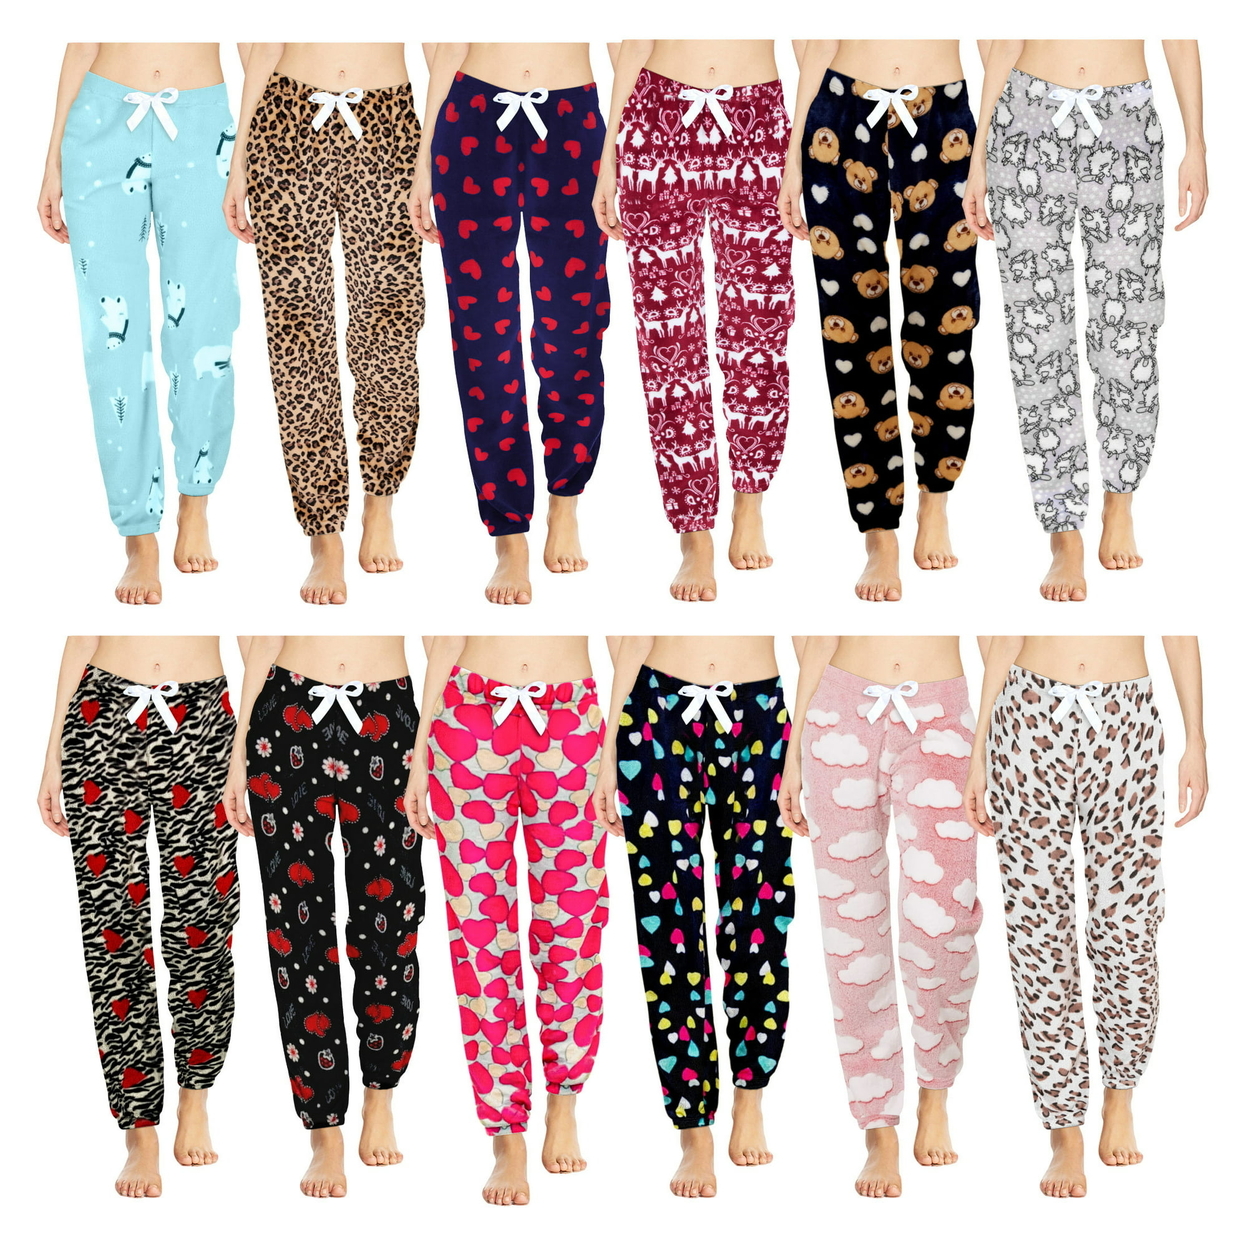 4-Pack: Women's Printed Ultra-Soft Comfy Stretch Micro-Fleece Pajama Lounge Pants - Xx-large, Shapes